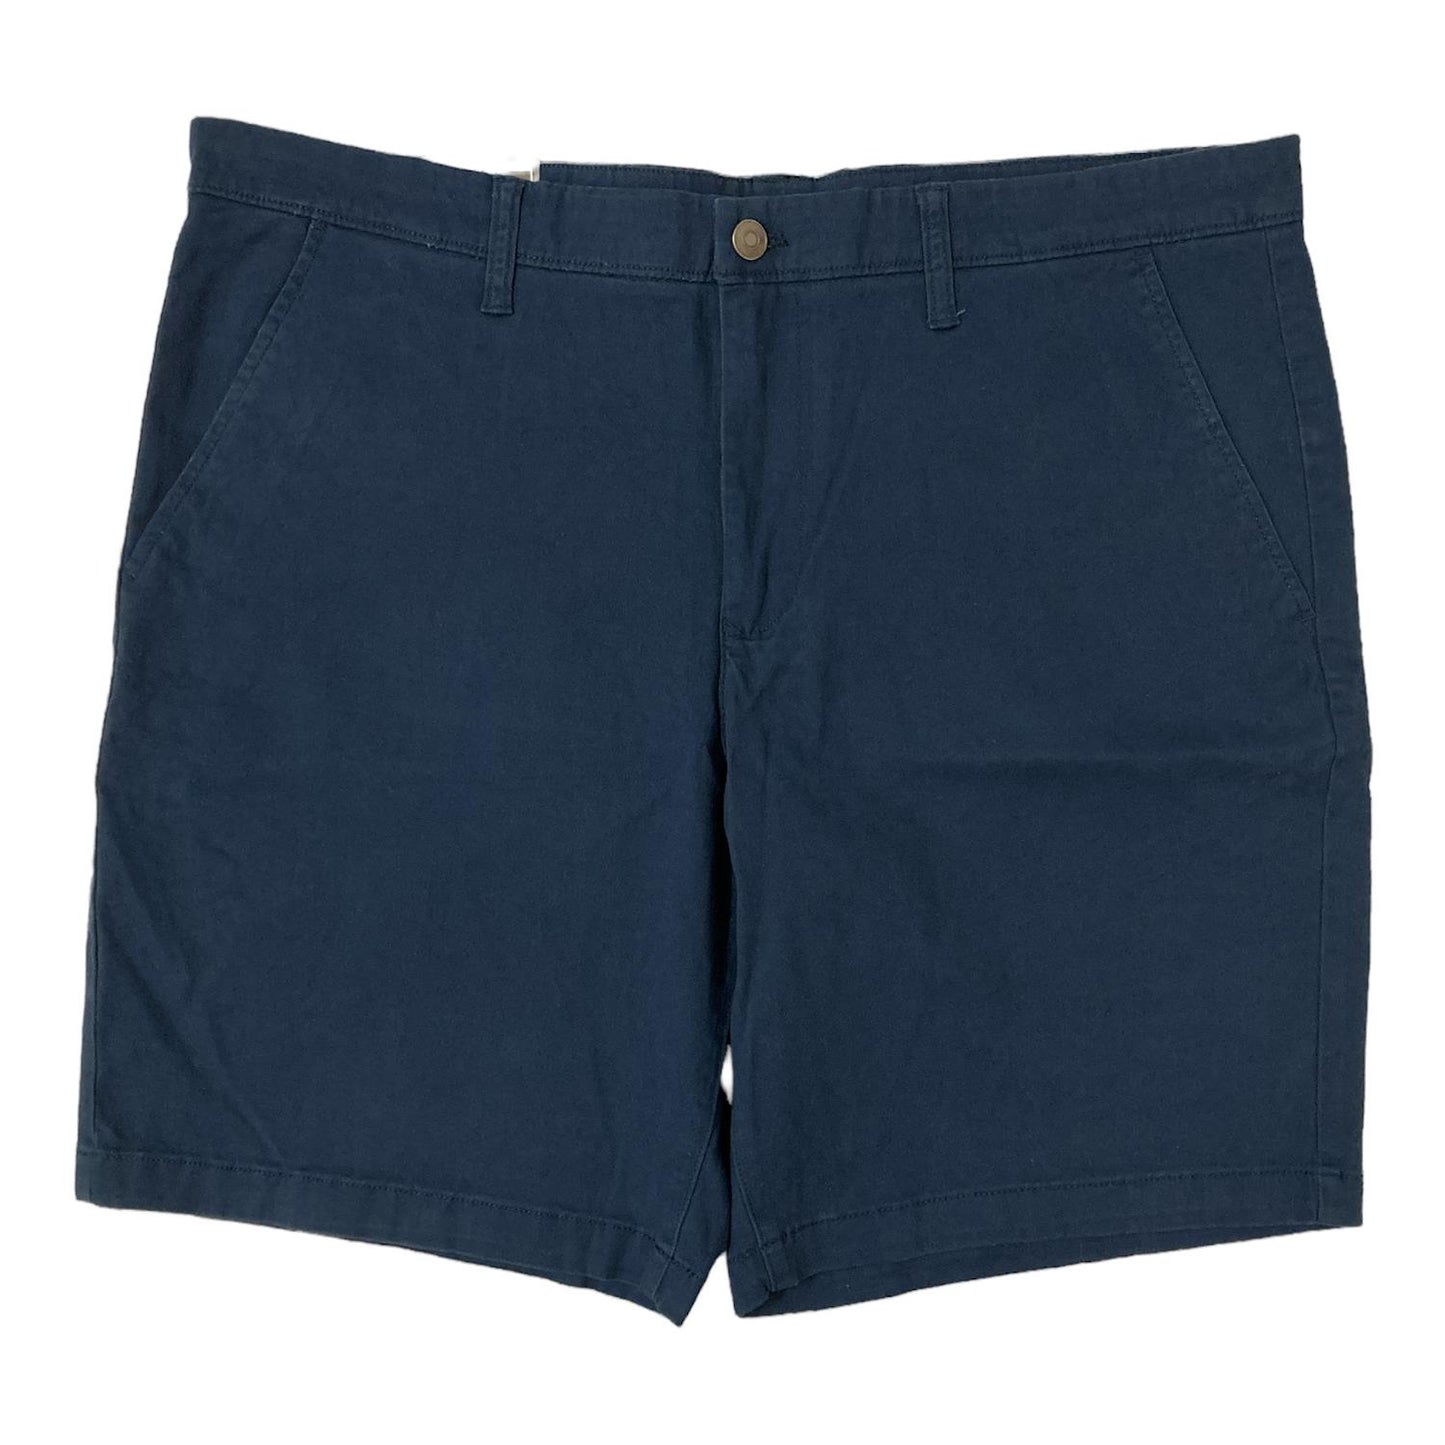 Member's Mark Men's Everyday Stretch Flat Front Shorts